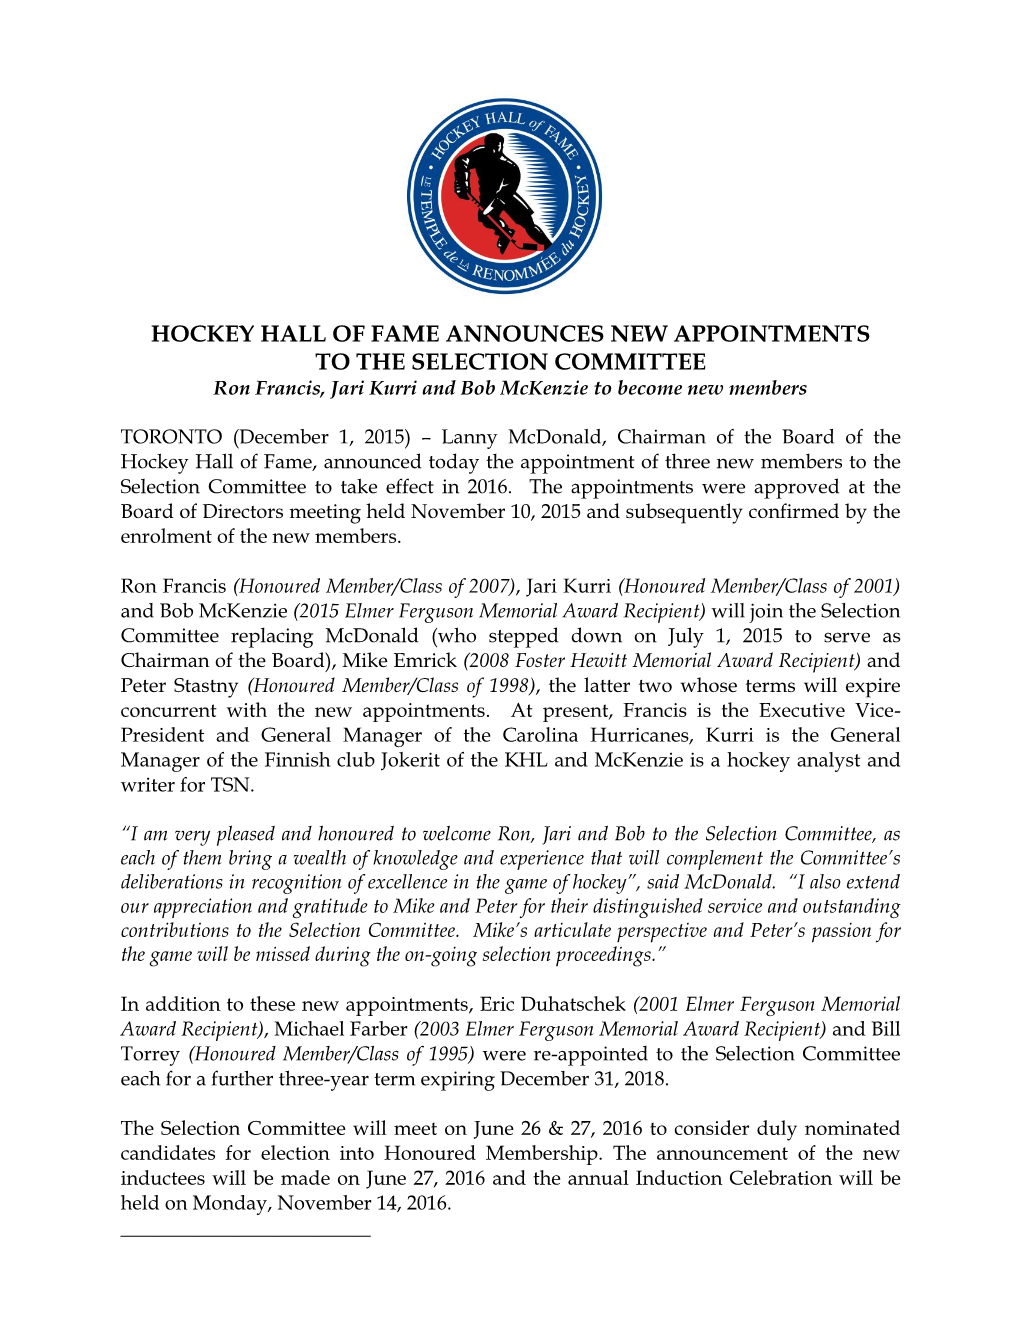 HOCKEY HALL of FAME ANNOUNCES NEW APPOINTMENTS to the SELECTION COMMITTEE Ron Francis, Jari Kurri and Bob Mckenzie to Become New Members